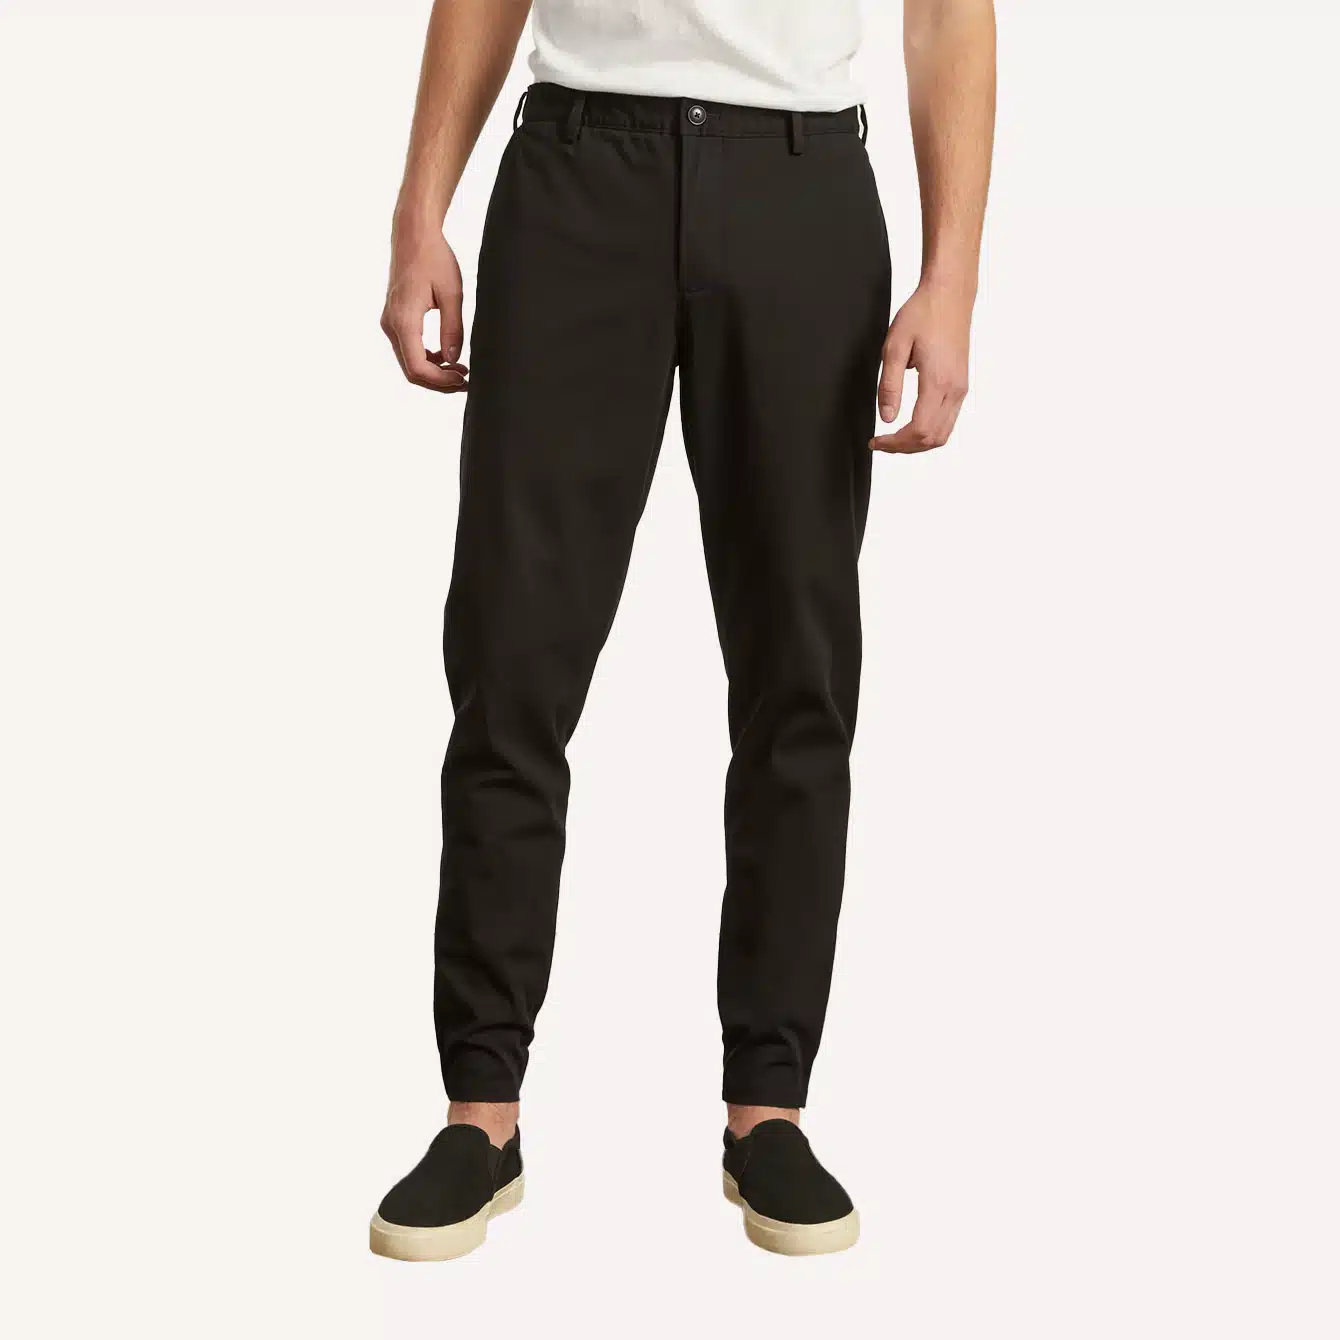 travel pants for fat guys